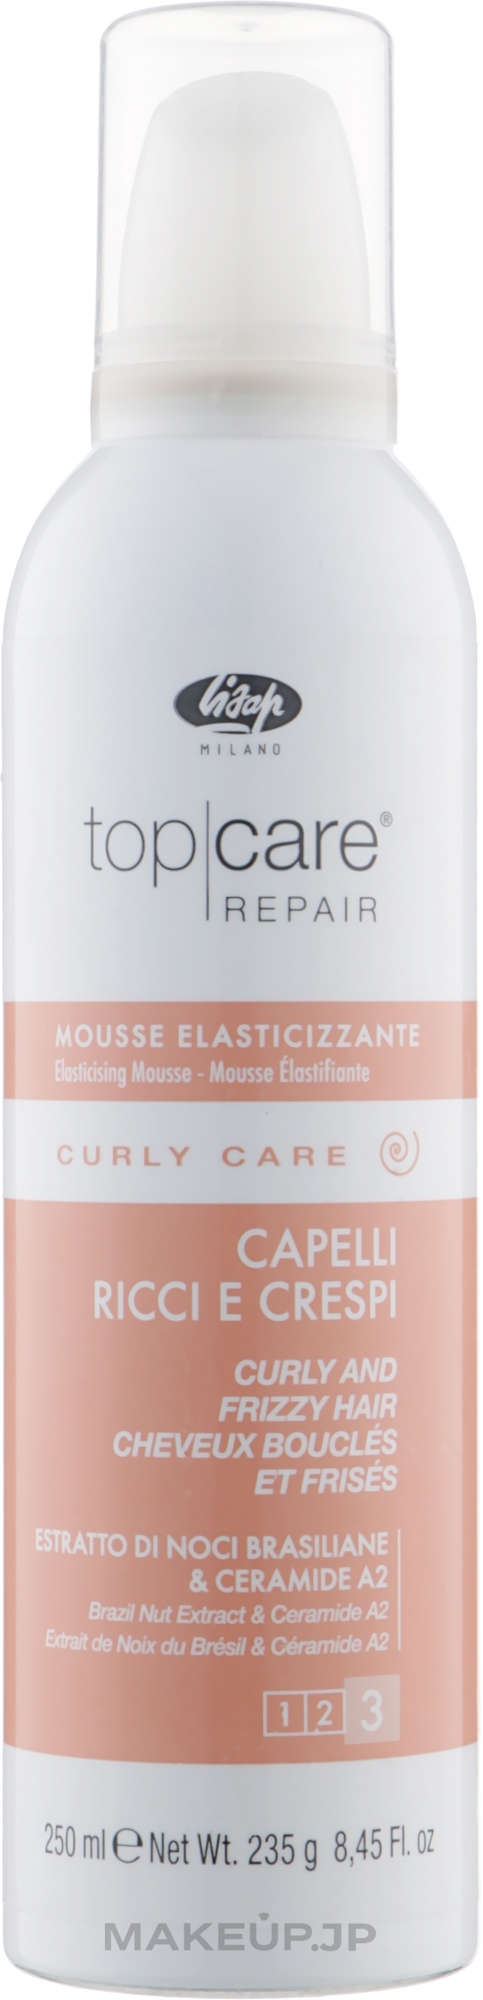 Curly & Unruly Hair Mousse - Lisap Milano Curly Care Elasticising Mousse — photo 250 ml